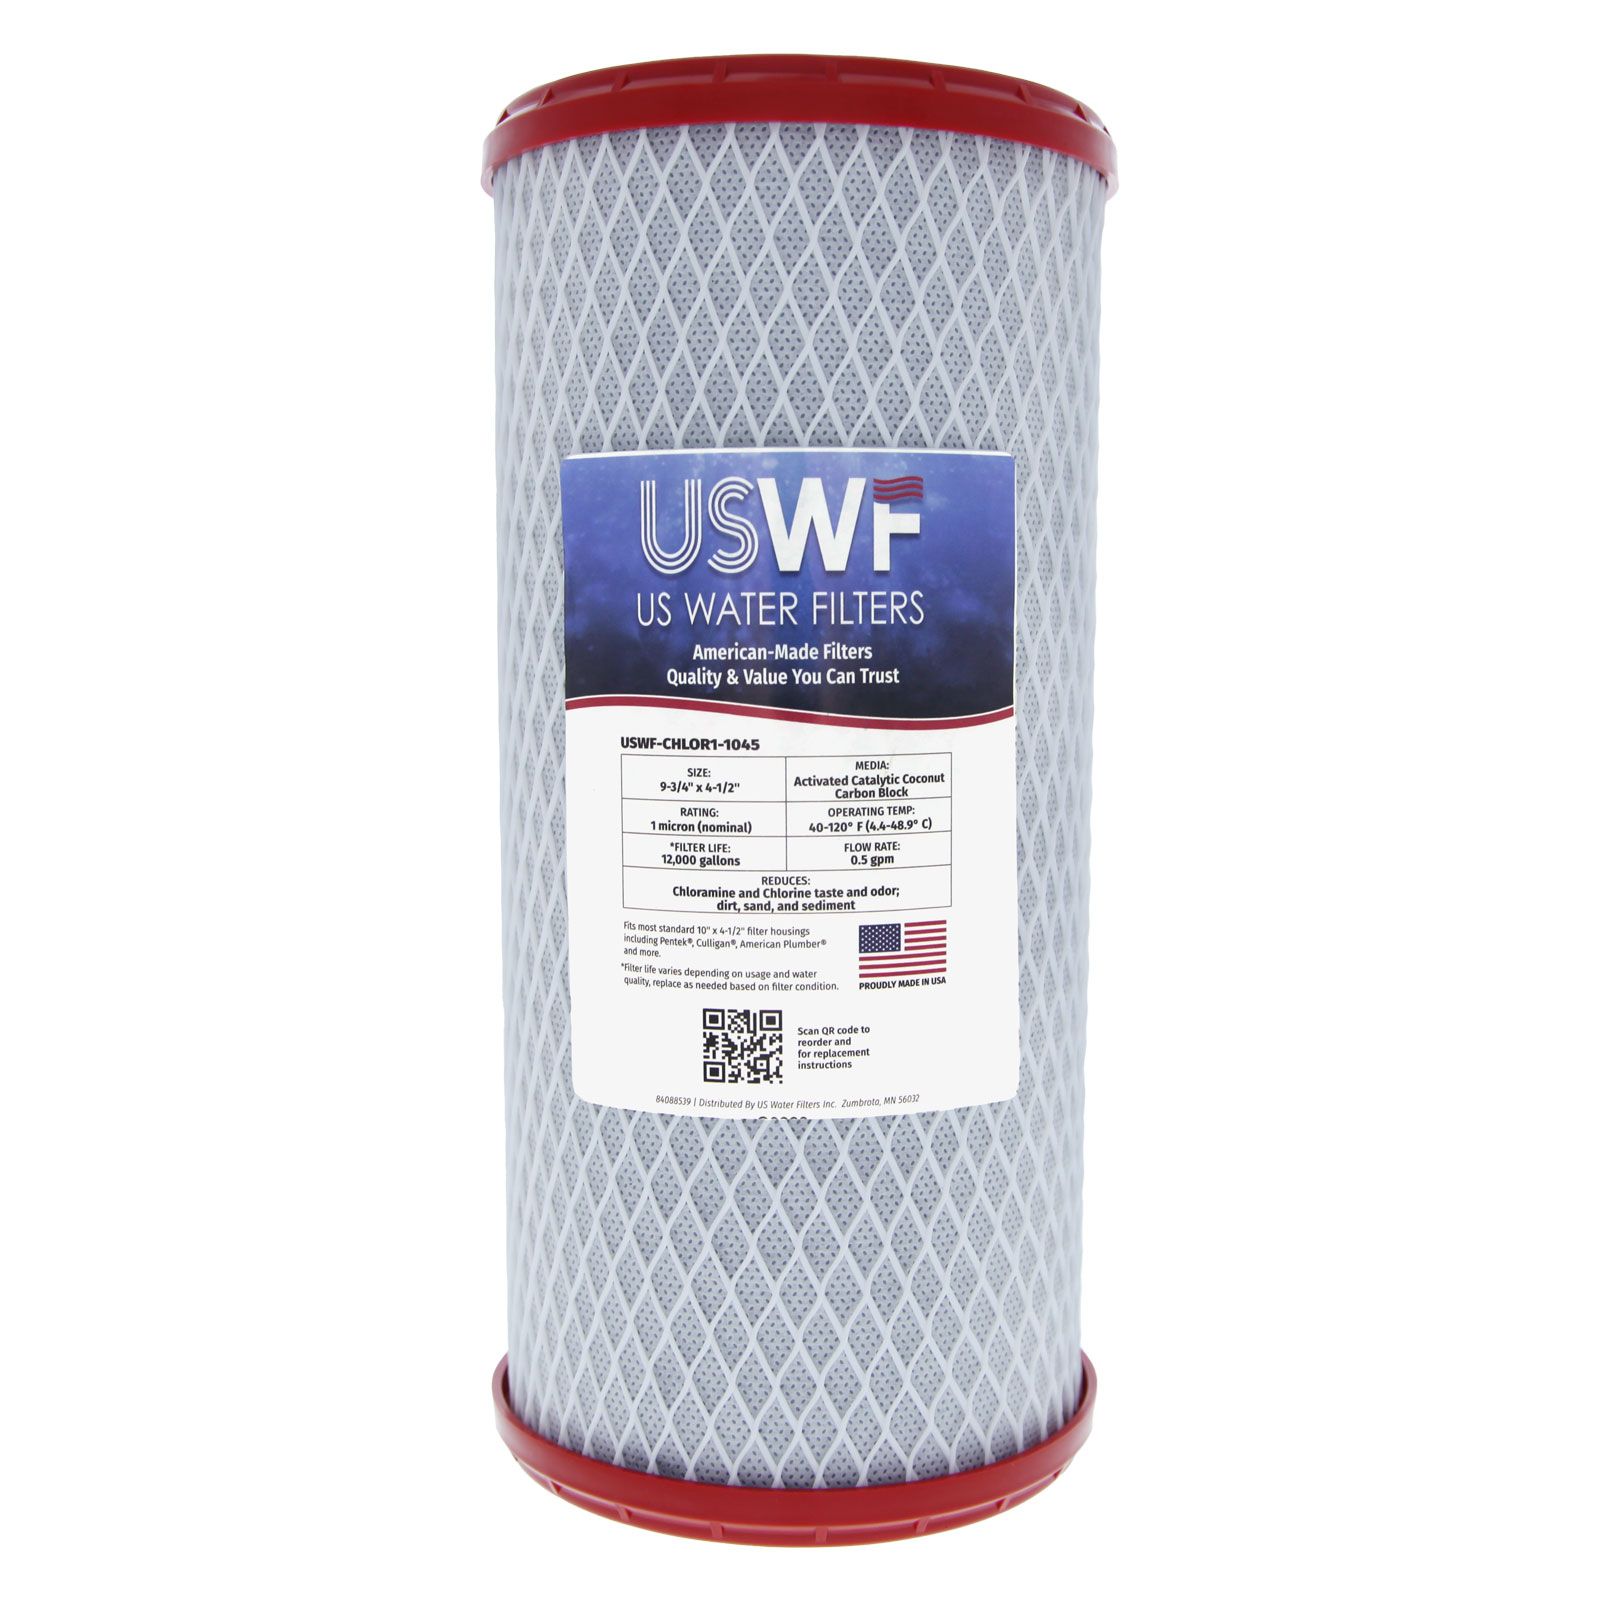 USWF Chloramine Dual 10" 2-Stage Filtration System, Sediment & Chloramine Carbon Block Filters, 1" Inlet/Outleter 3